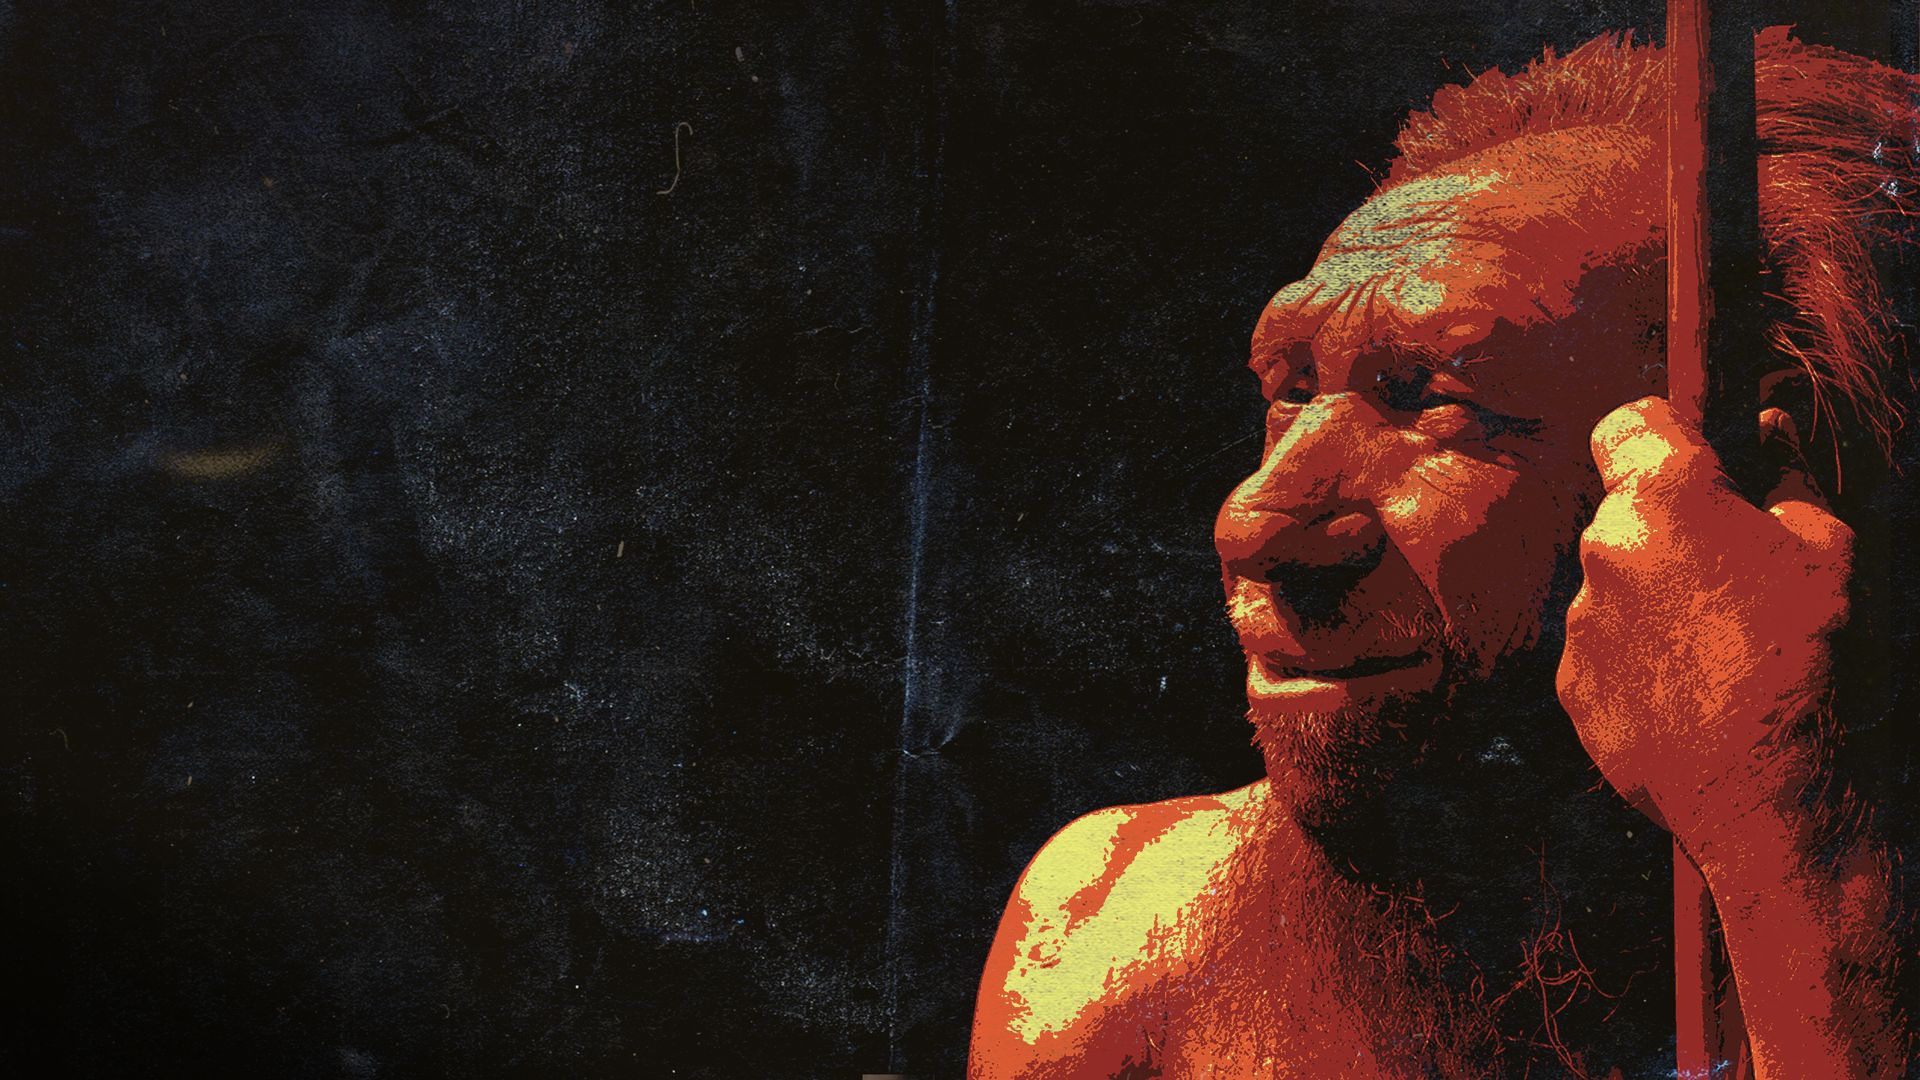 The Neanderthal in Us